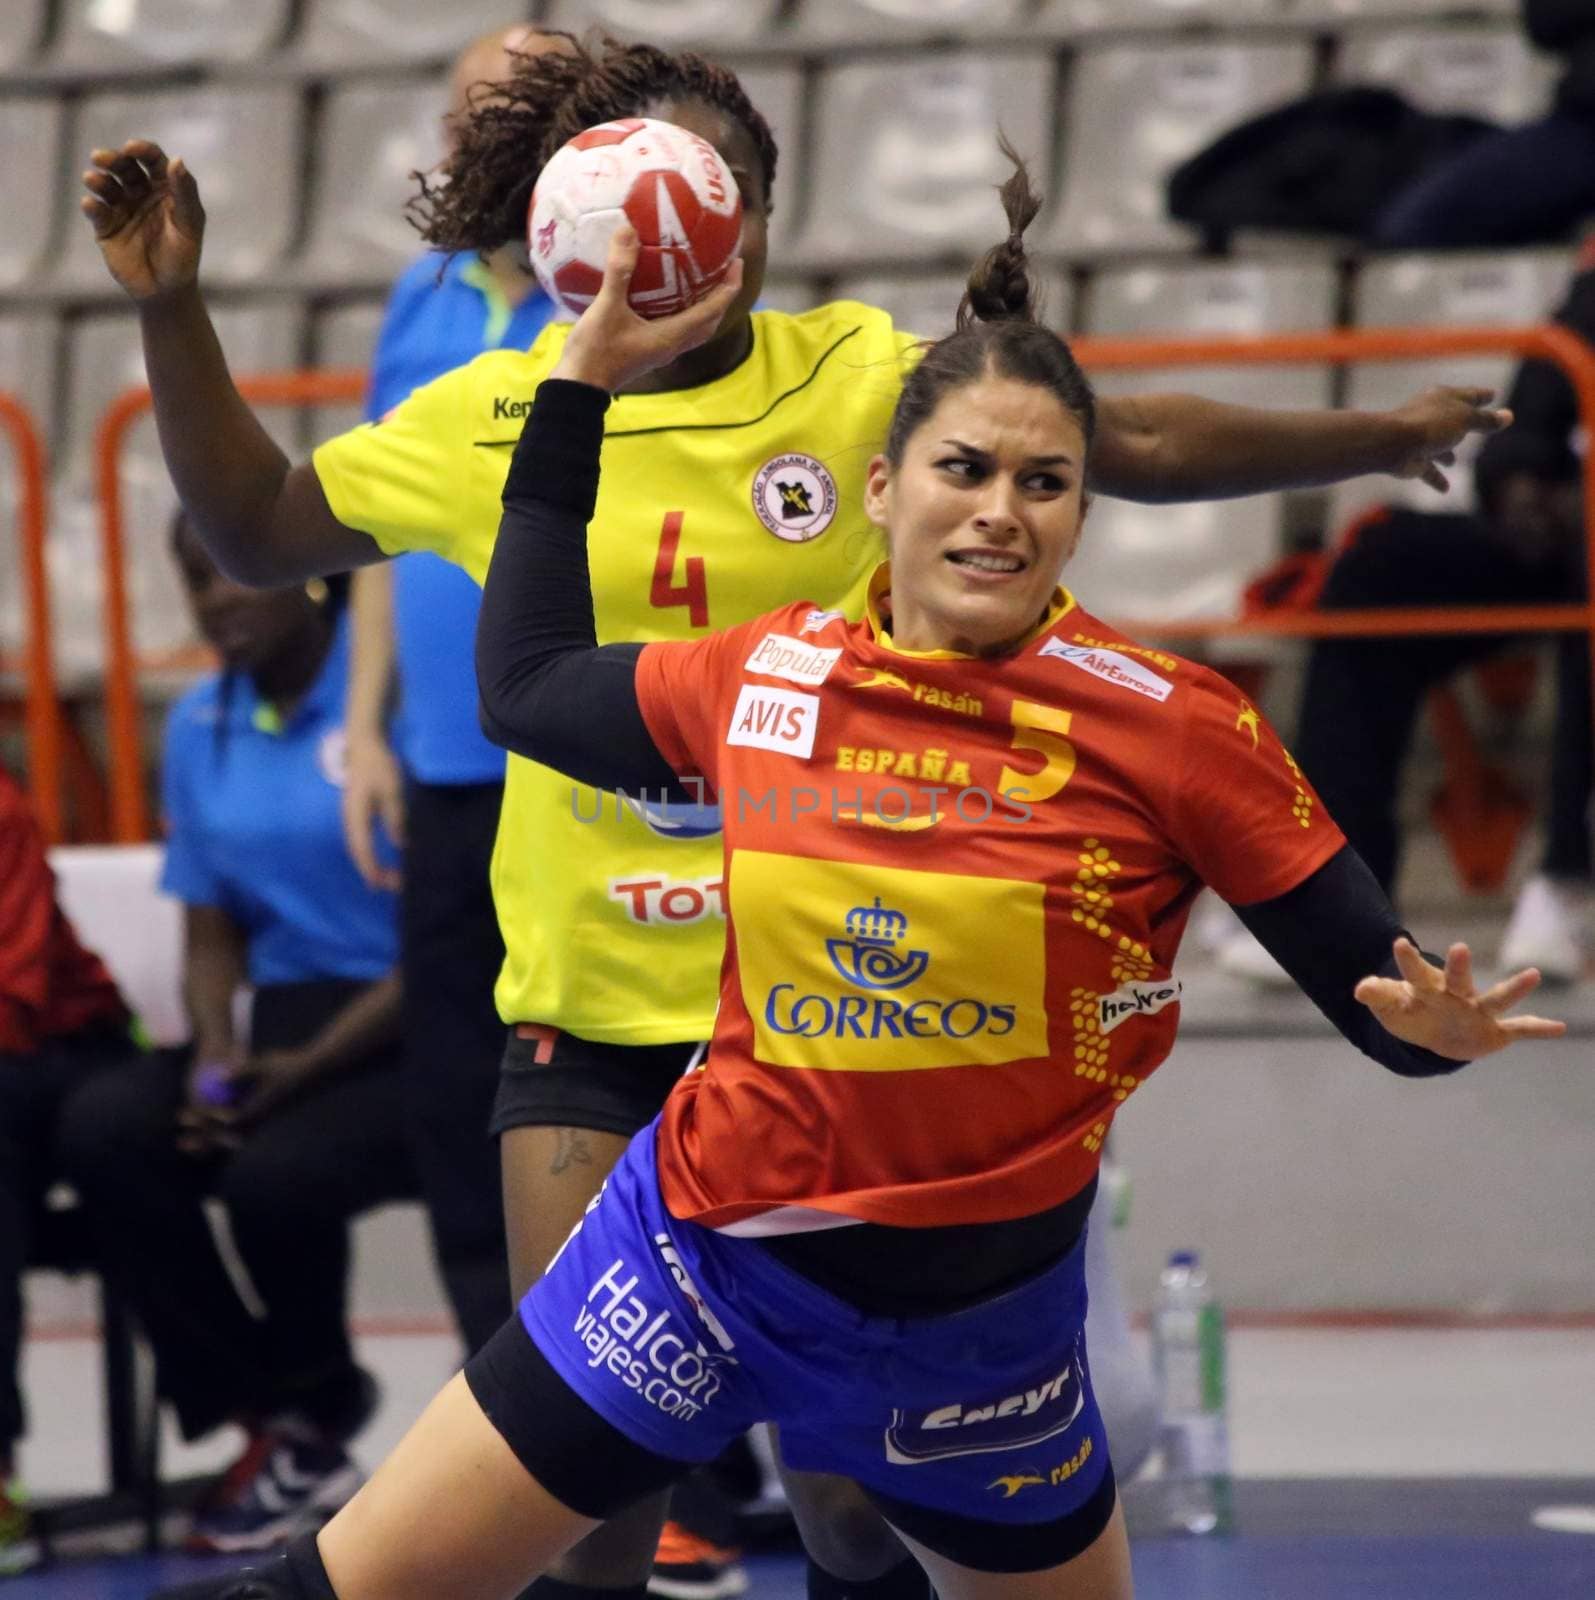 SPAIN, Gijon: A Spanish handballer prepares to launch the ball during the game against Angola on November 27, 2015 at the Torneo Internacional de Espa�a in Gijon, Spain. Spain would go on to win by a score of 37-27.